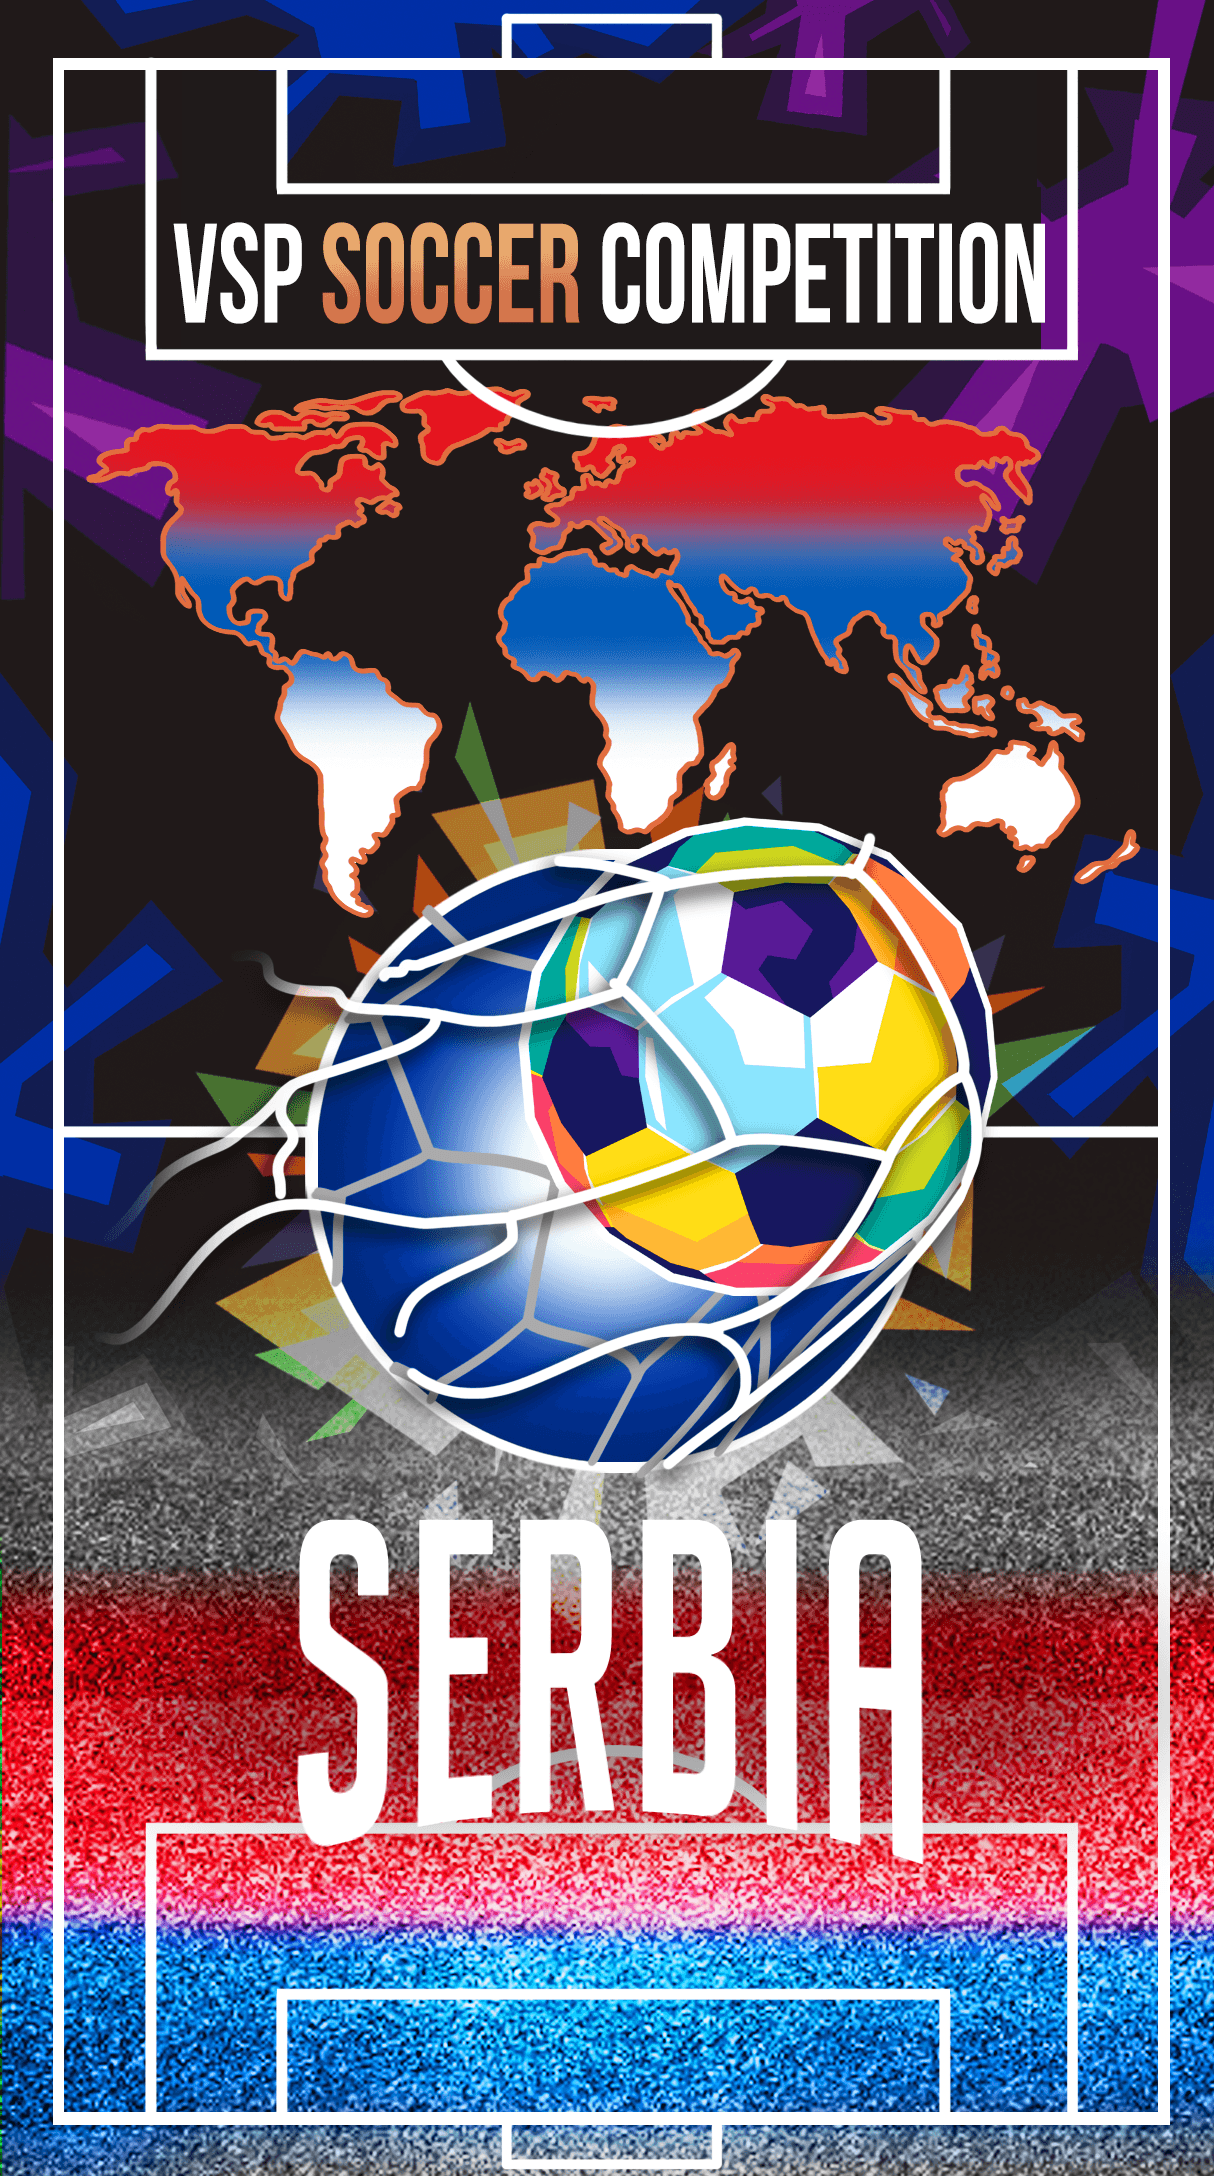 Serbia - VSP World Cup Competition